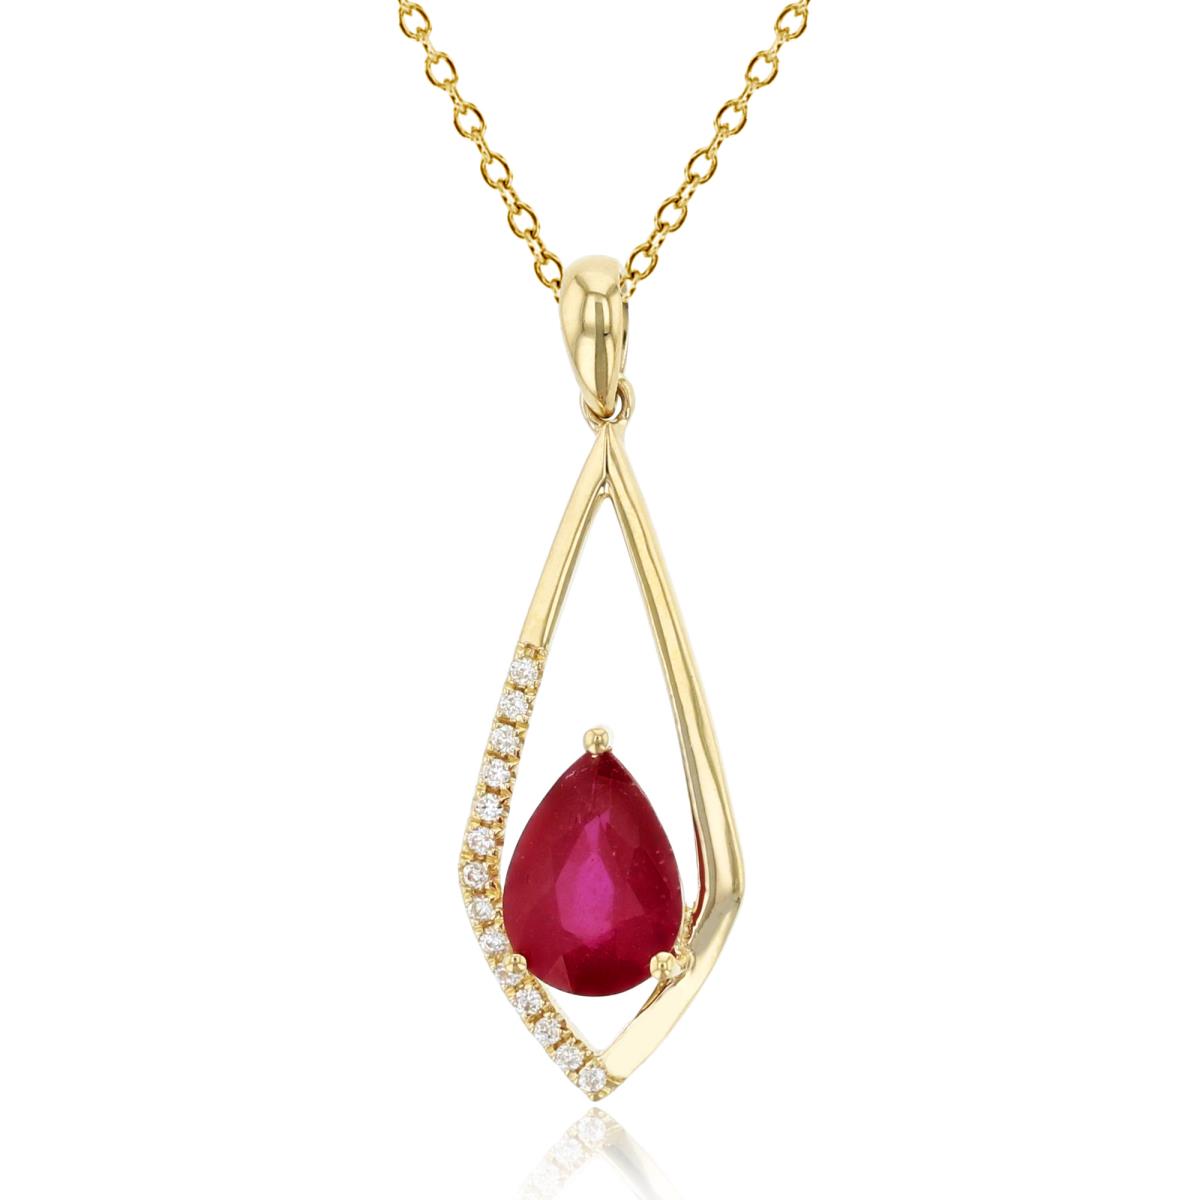 14K Yellow Gold 0.07 CTTW Diamond & 7x5mm PS Glass Filled Ruby Open Rhomb Dangling 18"Necklace